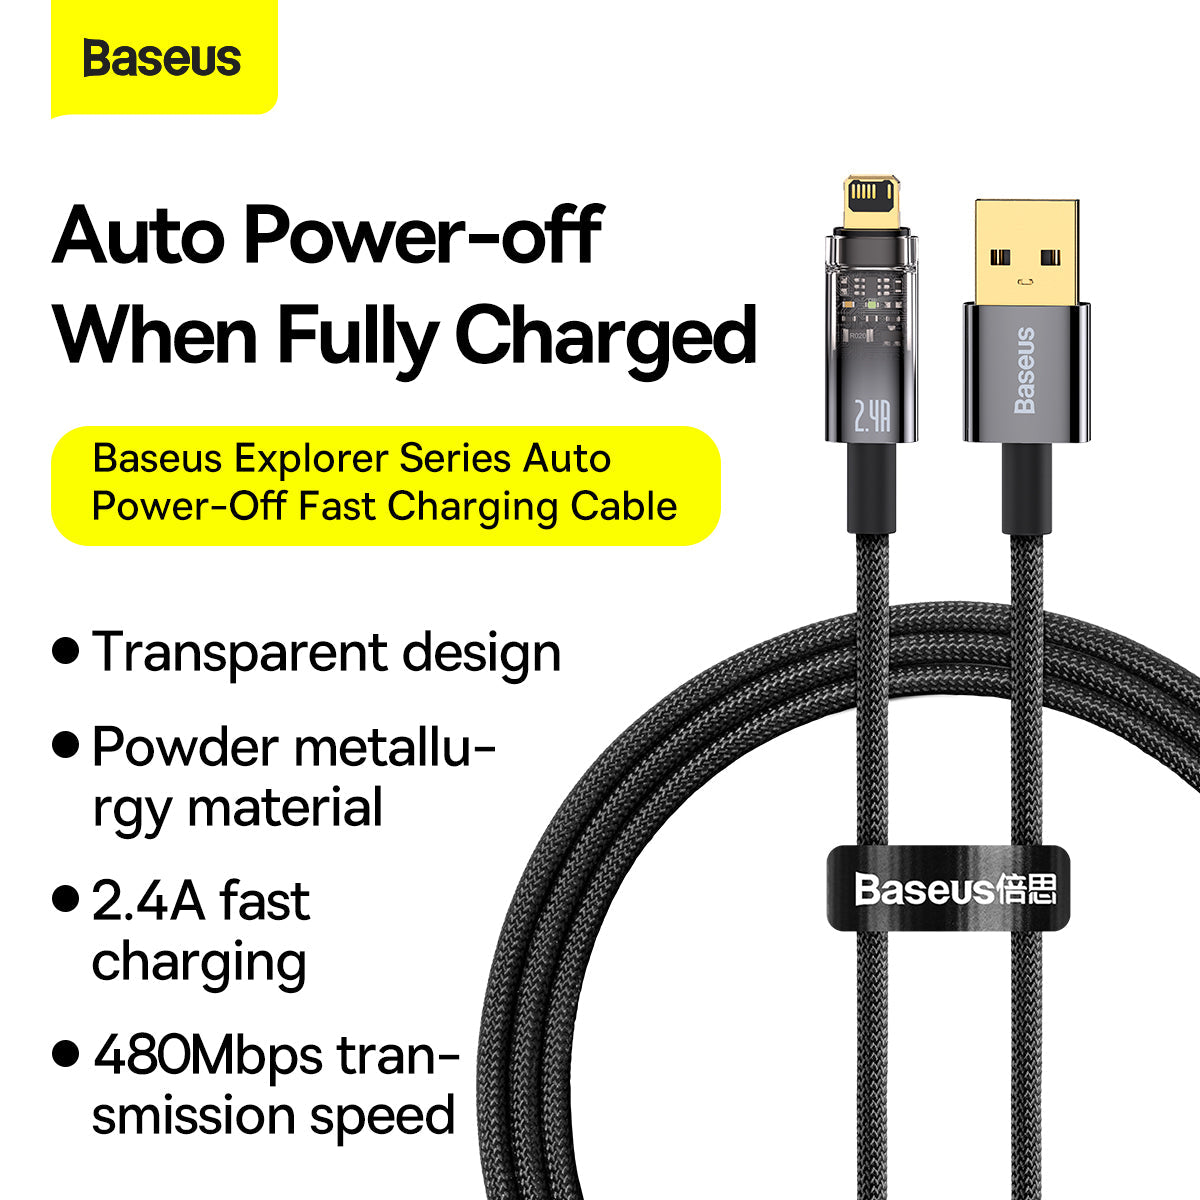 BASEUS EXPLORER SERIES AUTO POWER-OFF FAST CHARGING DATA CABLE USB TO IPH (2.4A)(1M), Auto Disconnect Cable, Lighting Cable, iPhone Cable, iPhone Charging Cable